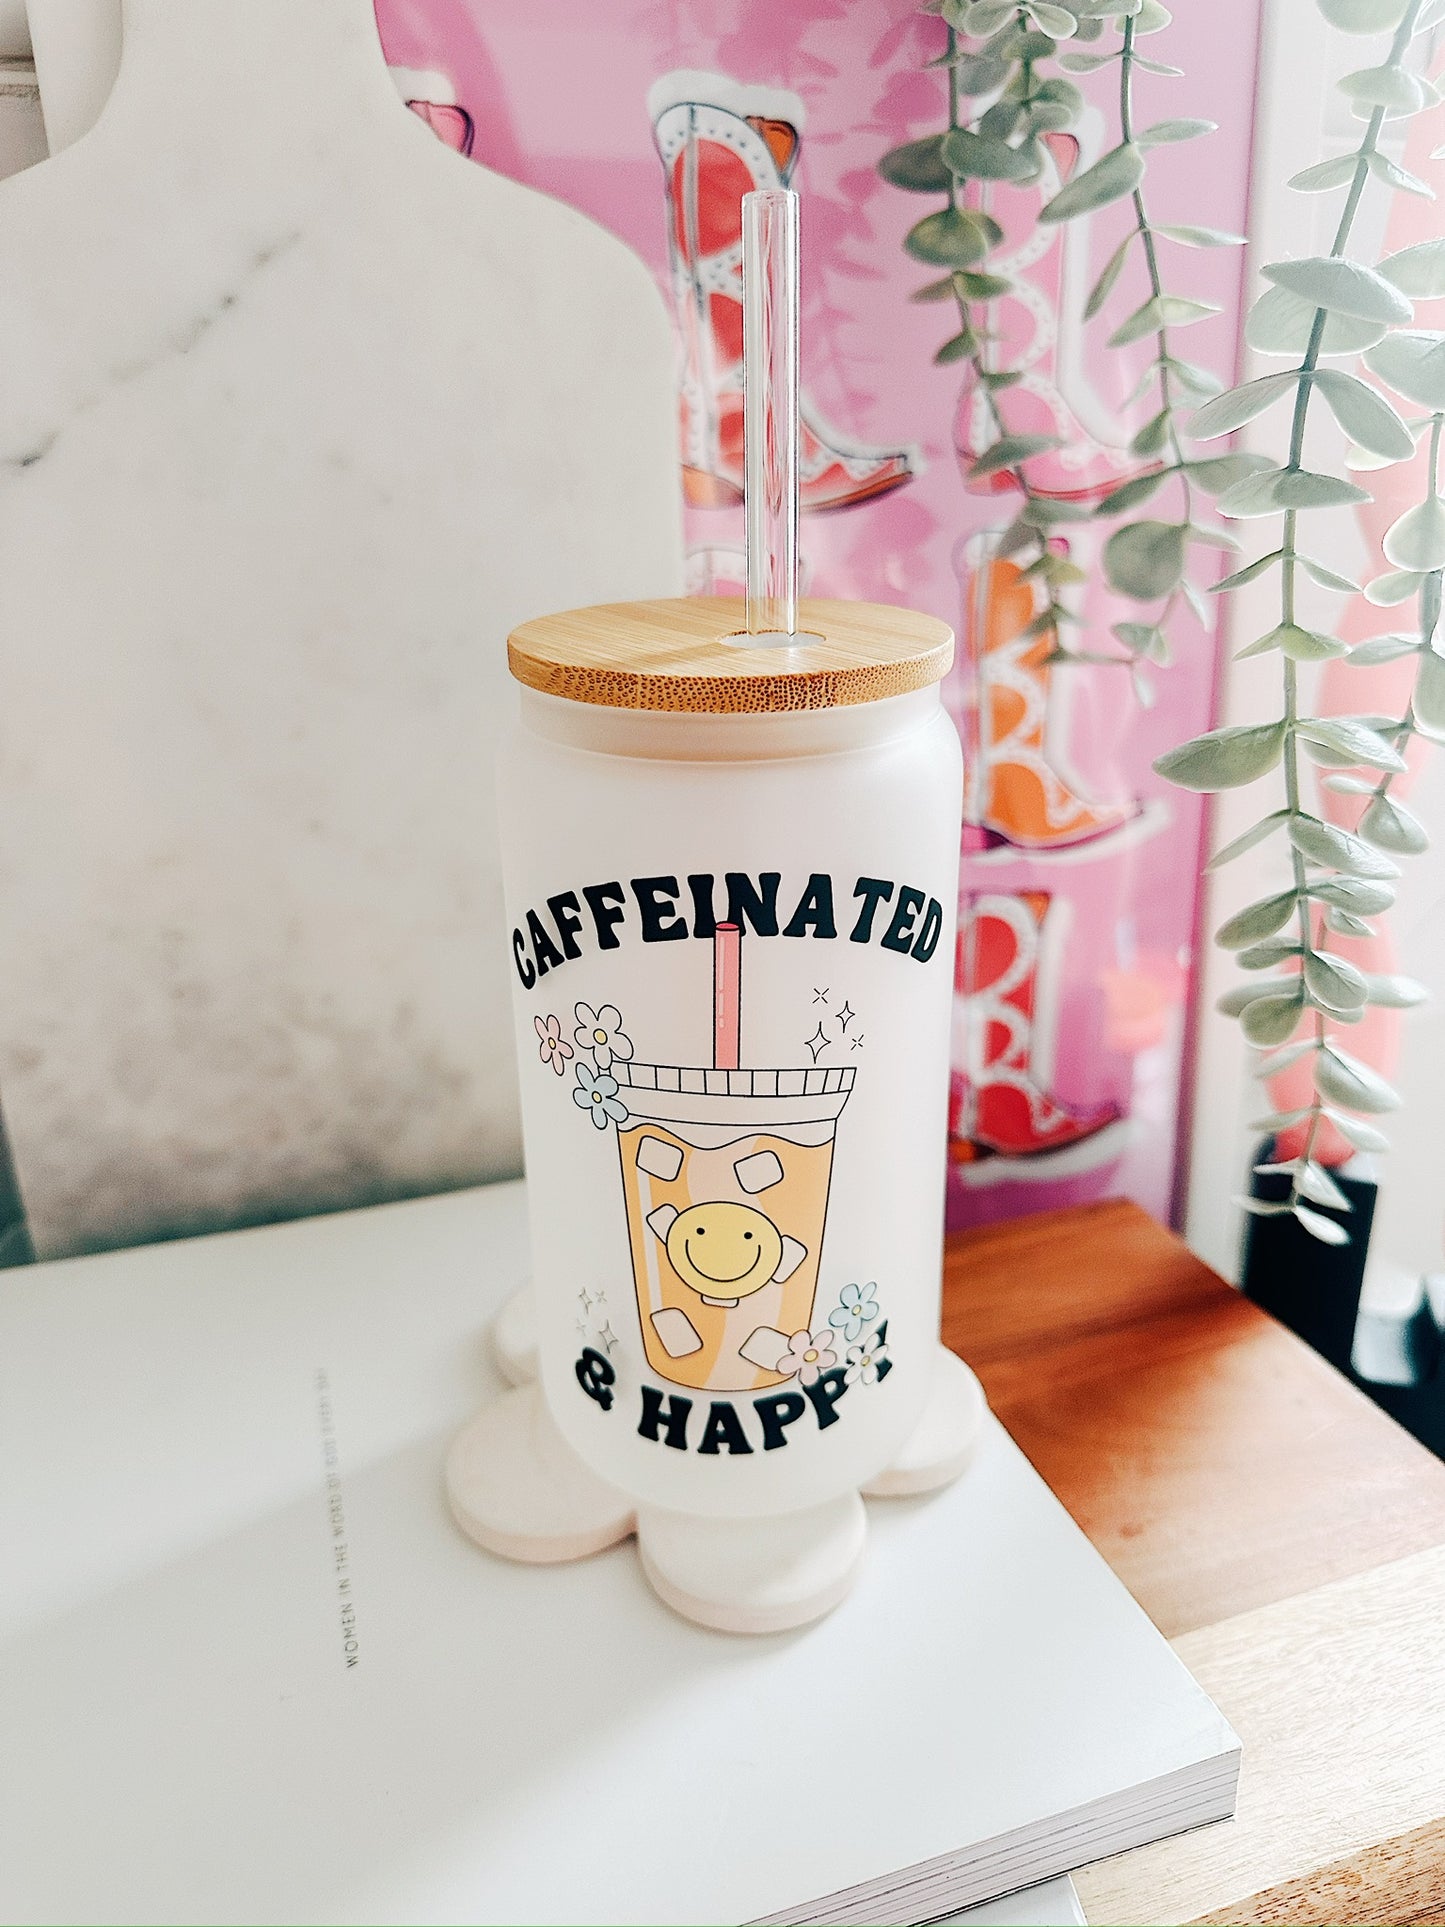 Caffeinated and Happy - Libbey Glass tumbler